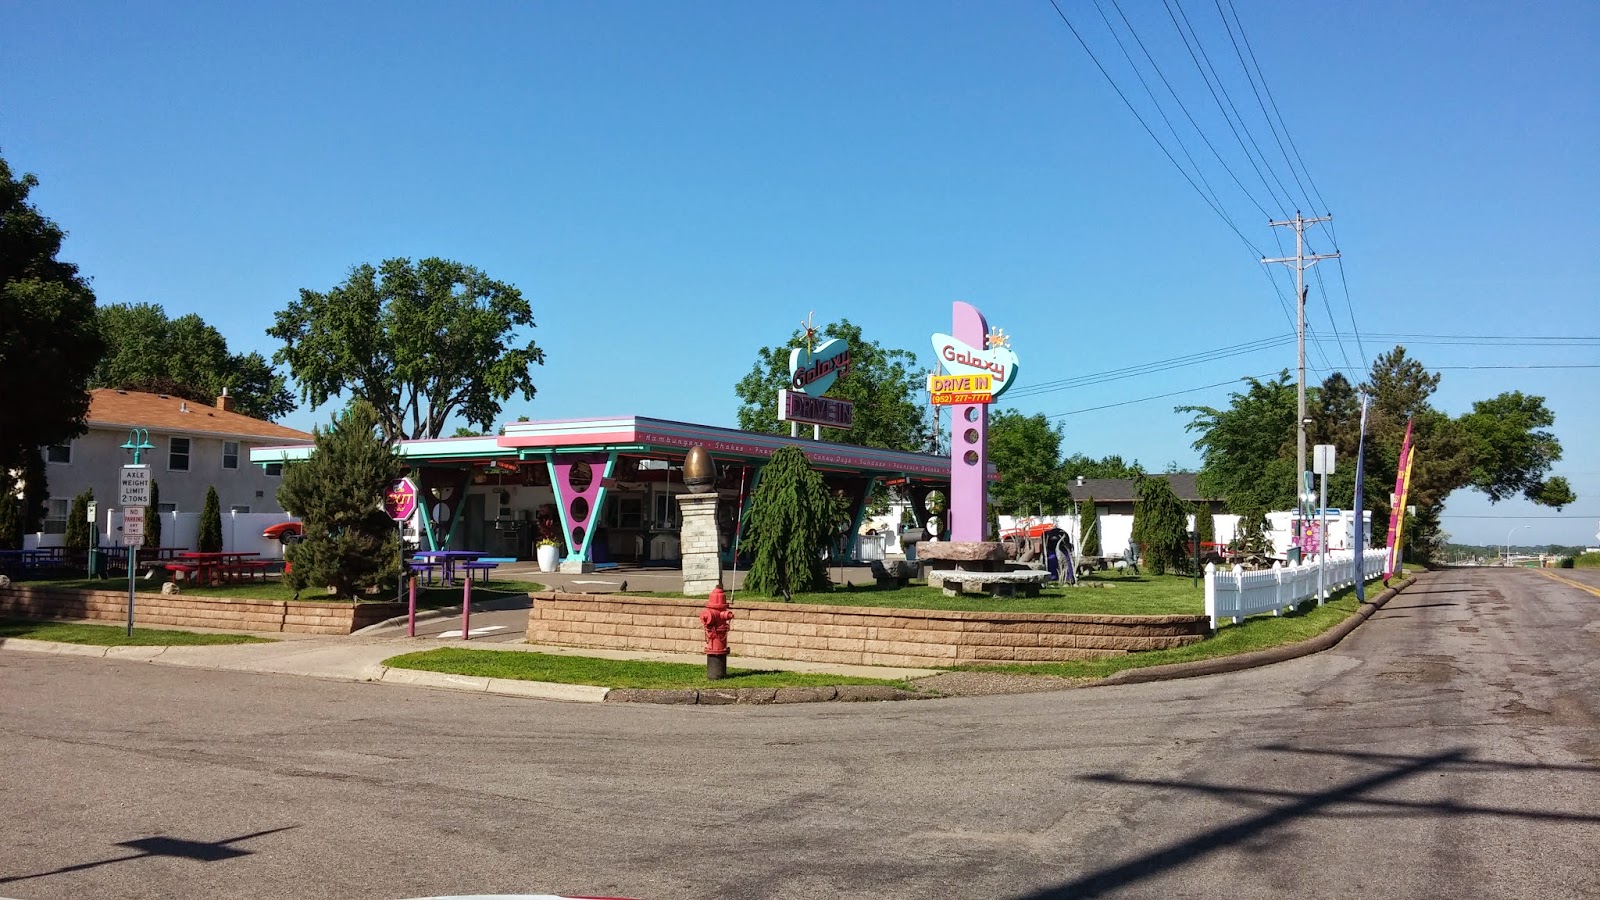 The Adventures of Blogger Mike: Galaxy Drive-In - St. Louis Park, MN